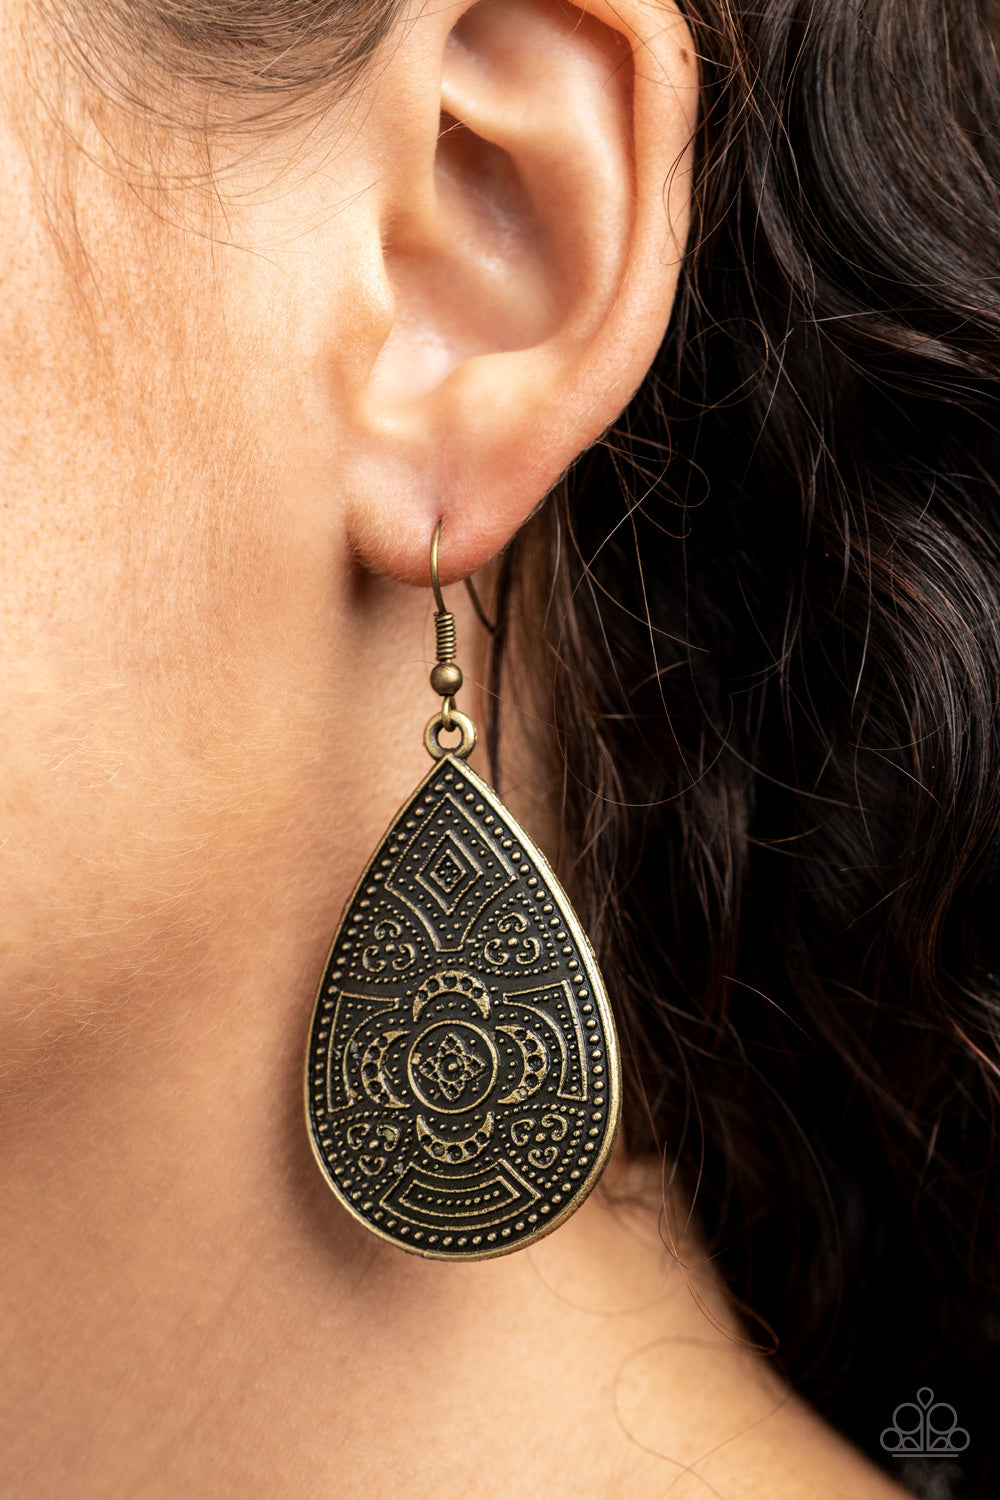 Paparazzi Accessories Tribal Takeover - Brass Earrings  - Lady T Accessories